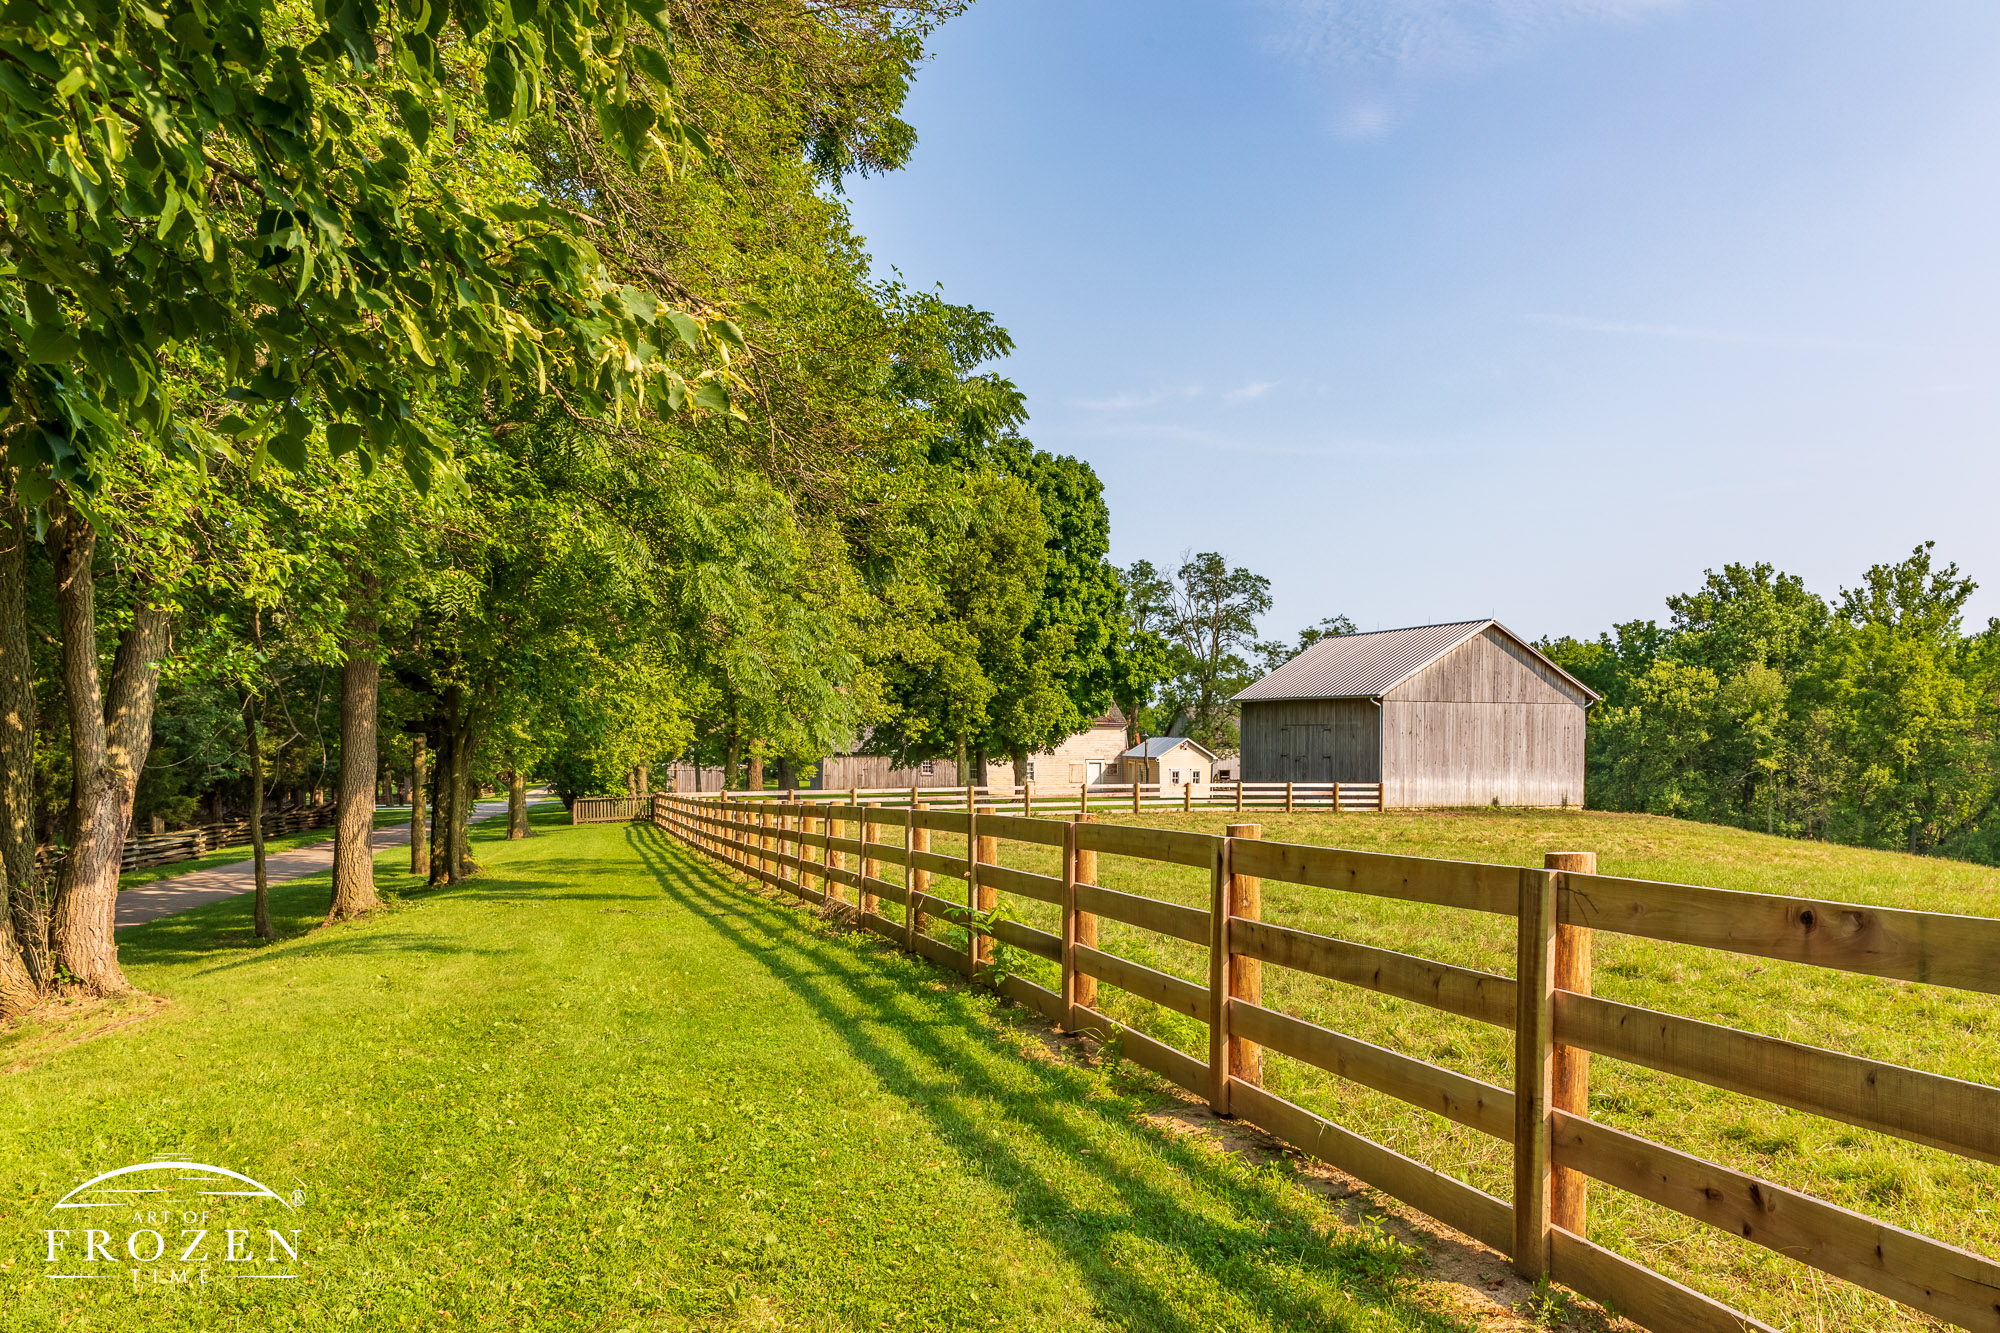 A wooden pasture fence leads the eye towards the historic farmstead at Carriage Hill MetroPark